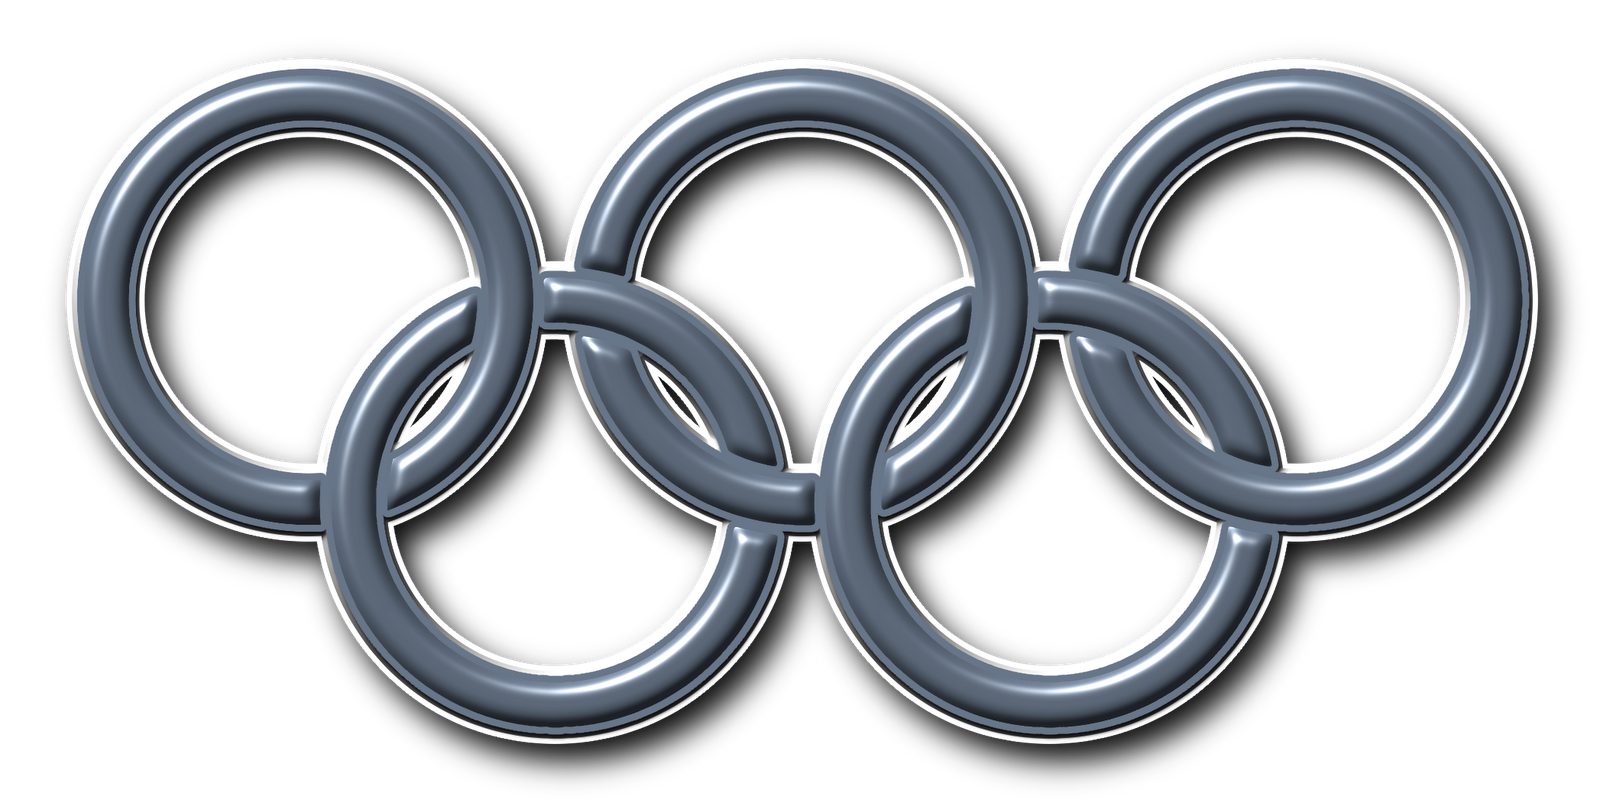 olympic rings, tom daley diving superstar #26262